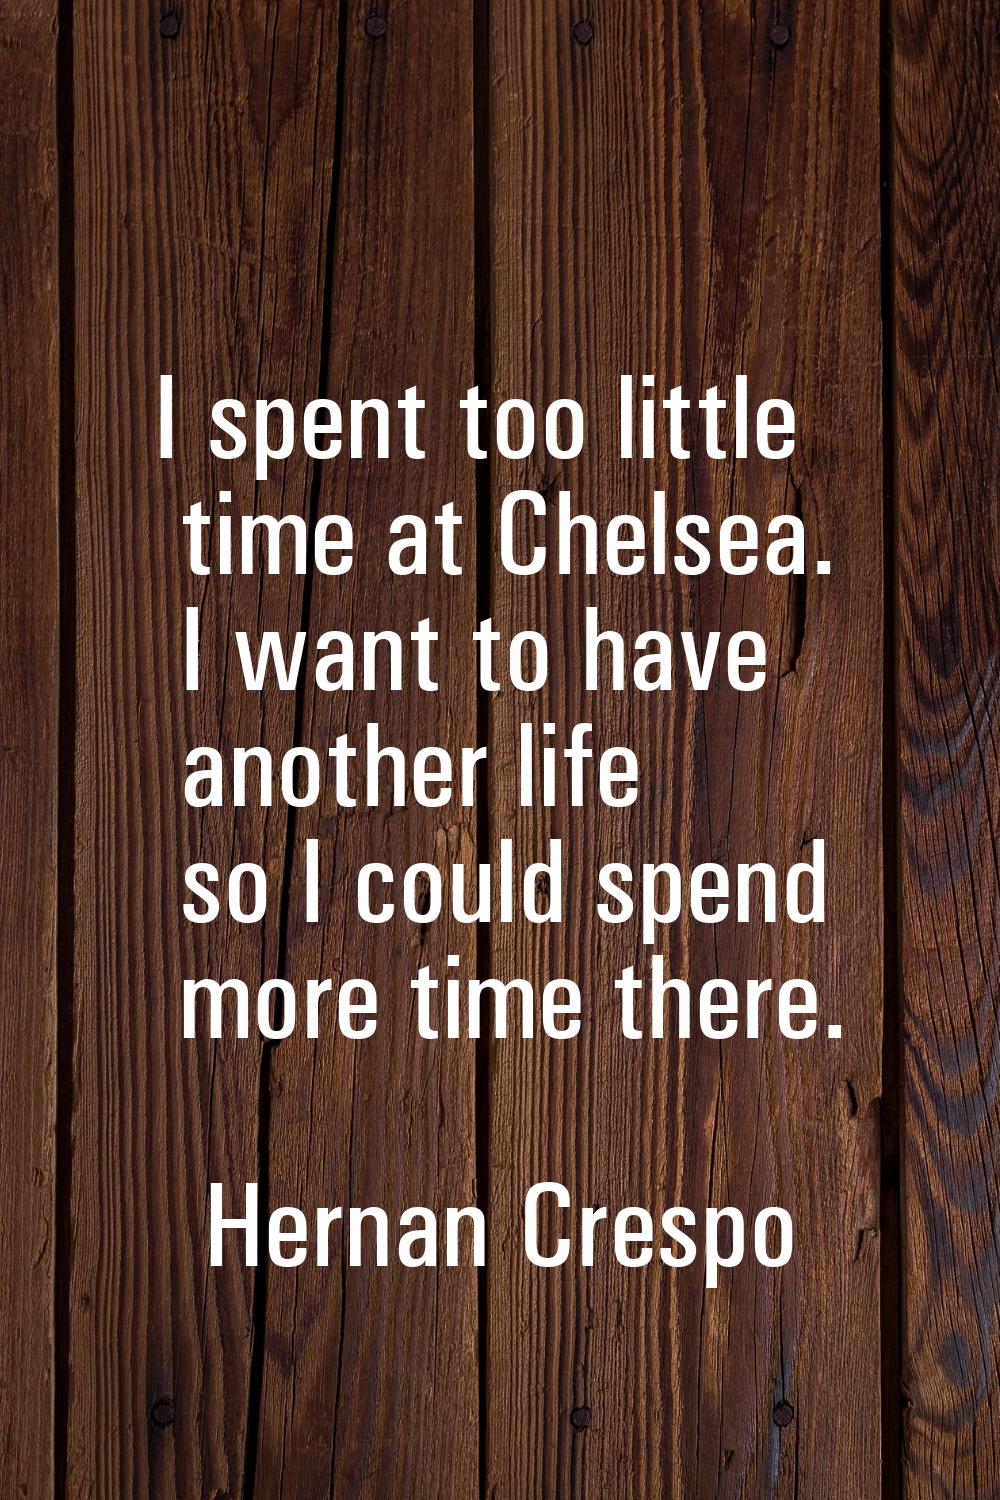 I spent too little time at Chelsea. I want to have another life so I could spend more time there.